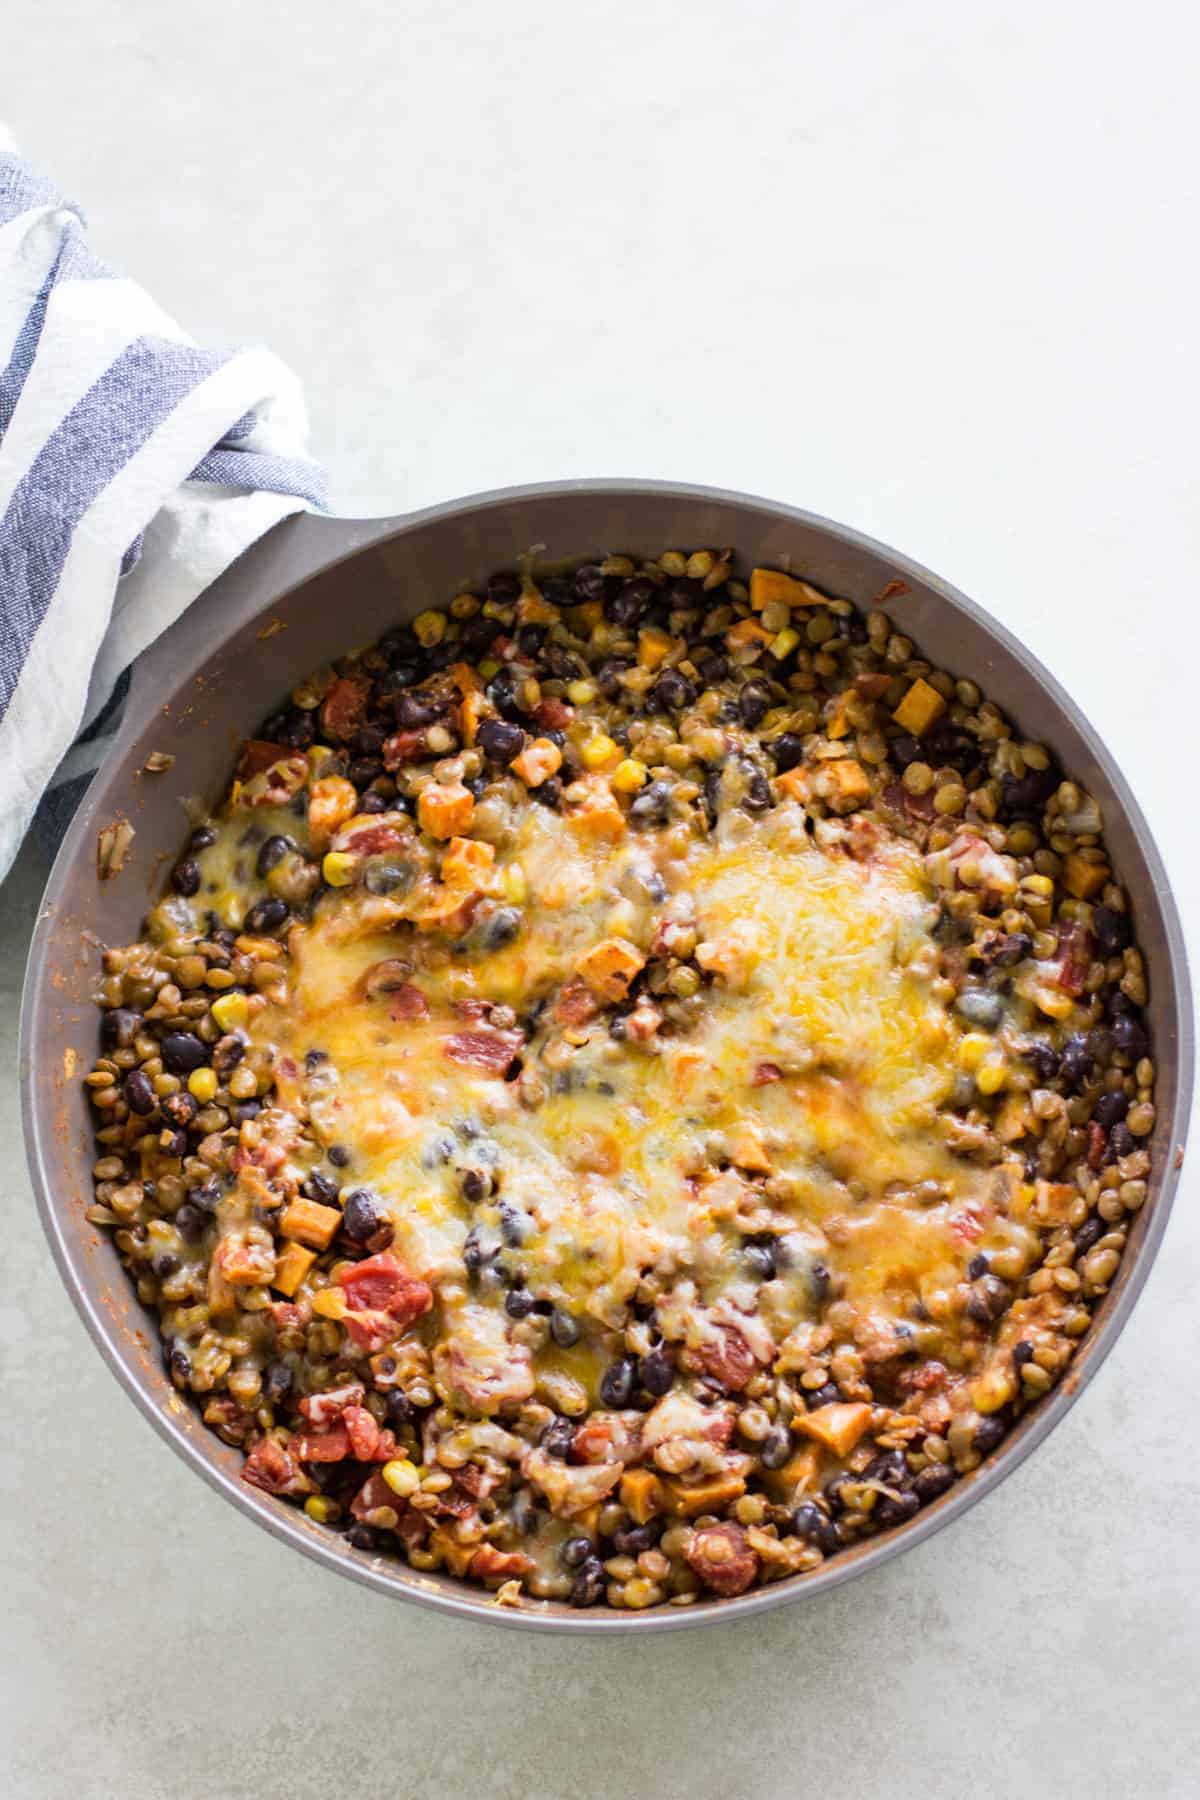 Mexican lentils in a large skillet topped with cheese and handle wrapped in blue and white striped kitchen towel